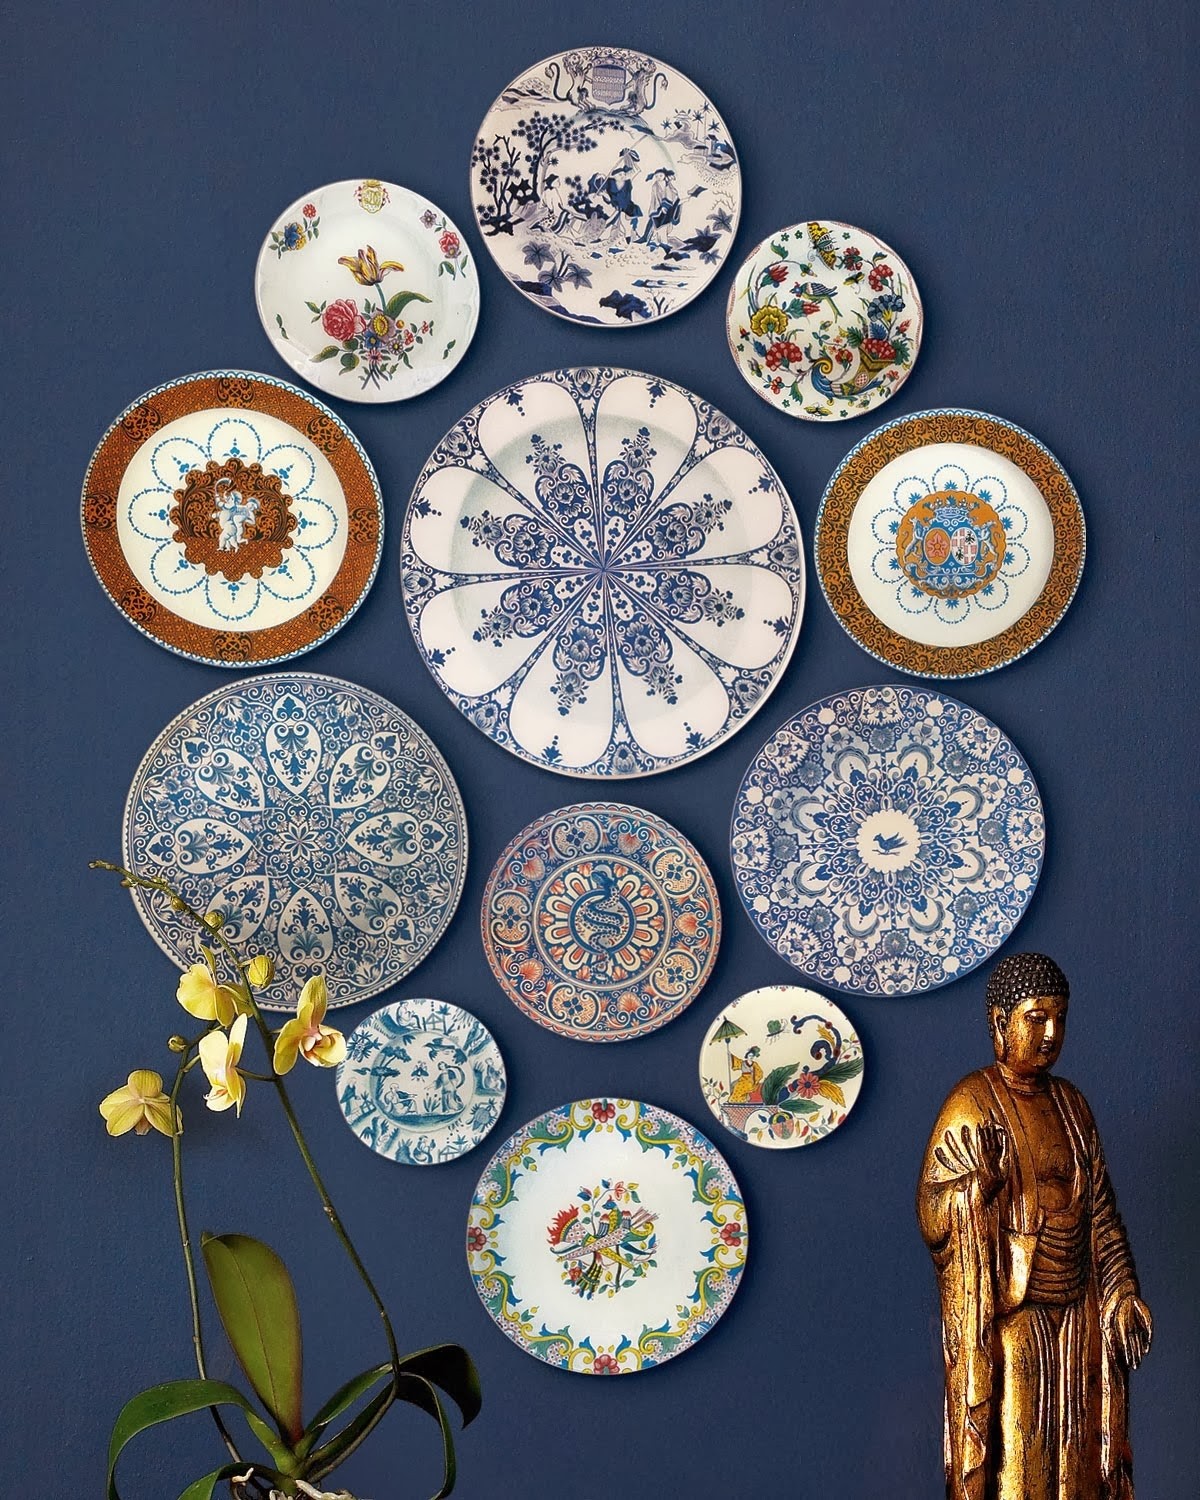 Decorative plates for the wall